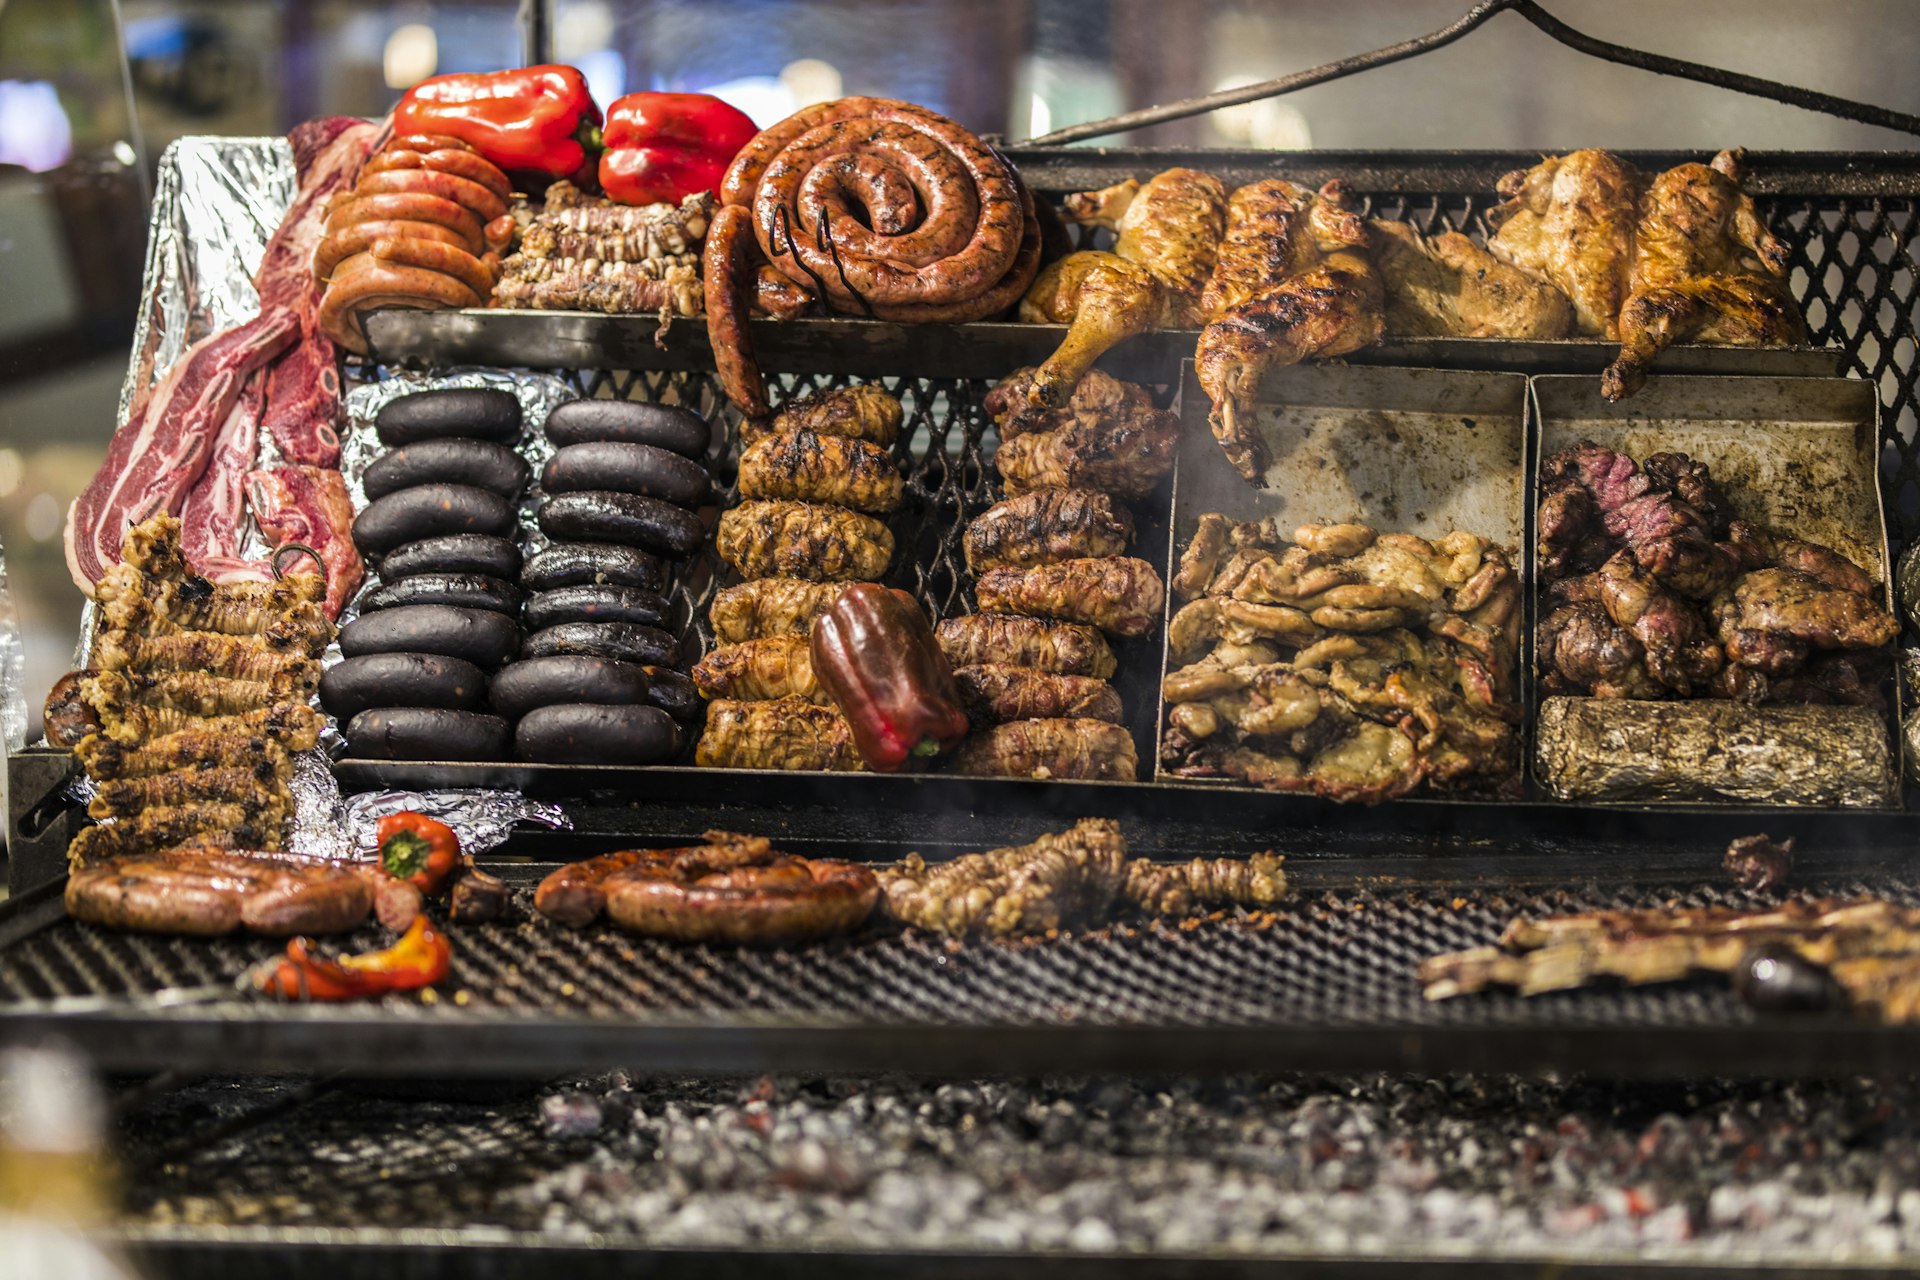 Sausages and other meets cook on an asado grill in Central Market, Montevideo, Uruguay, South America